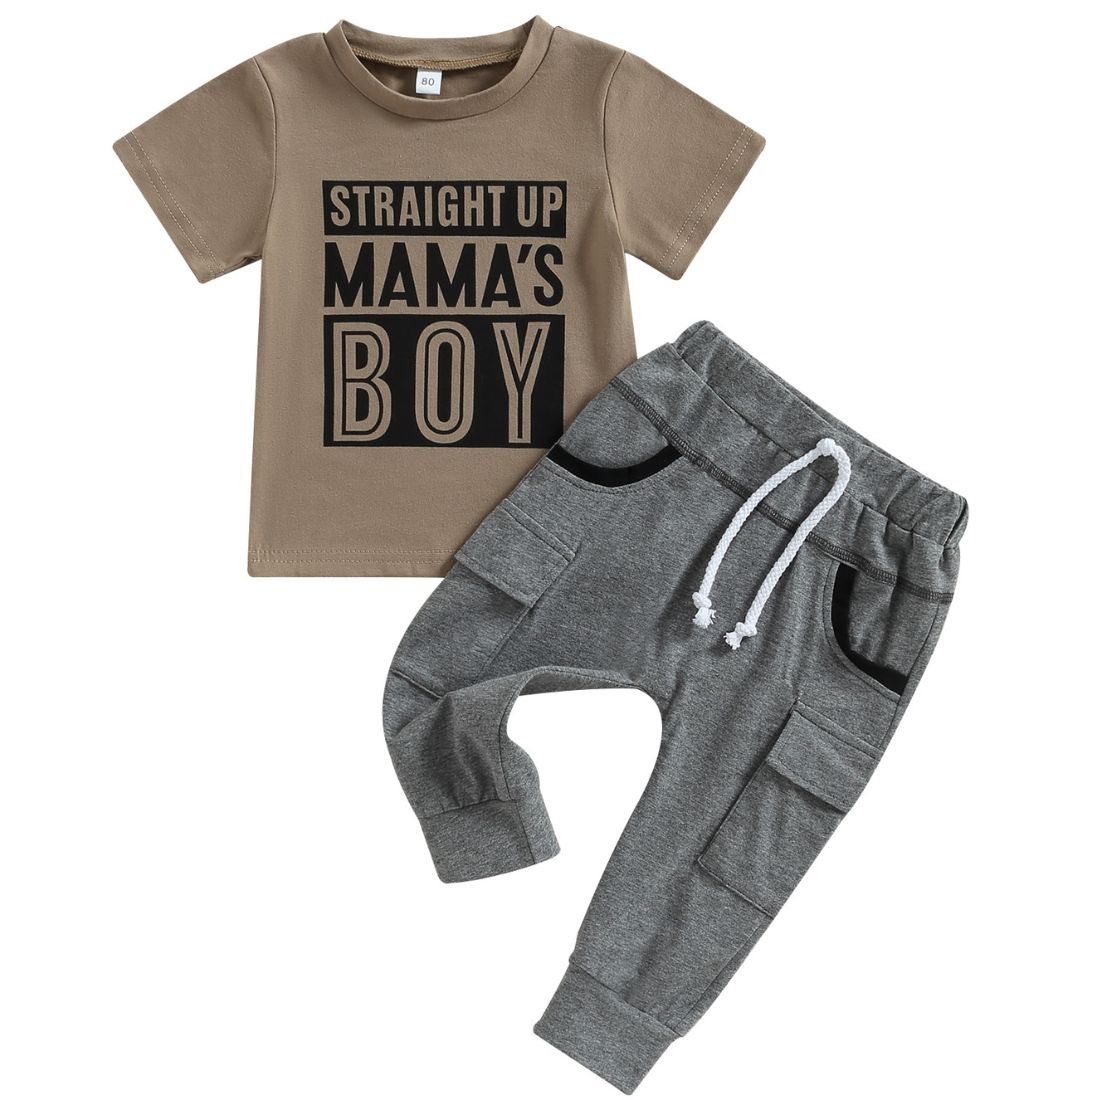 Little Boy Mama's Boy Tee & Pants 2-Piece Clothing Set - My Trendy Youngsters | Buy on-trend and stylish Baby and Toddler Clothing Sets @ My Trendy Youngsters - Dress your little one in Style @ My Trendy Youngsters